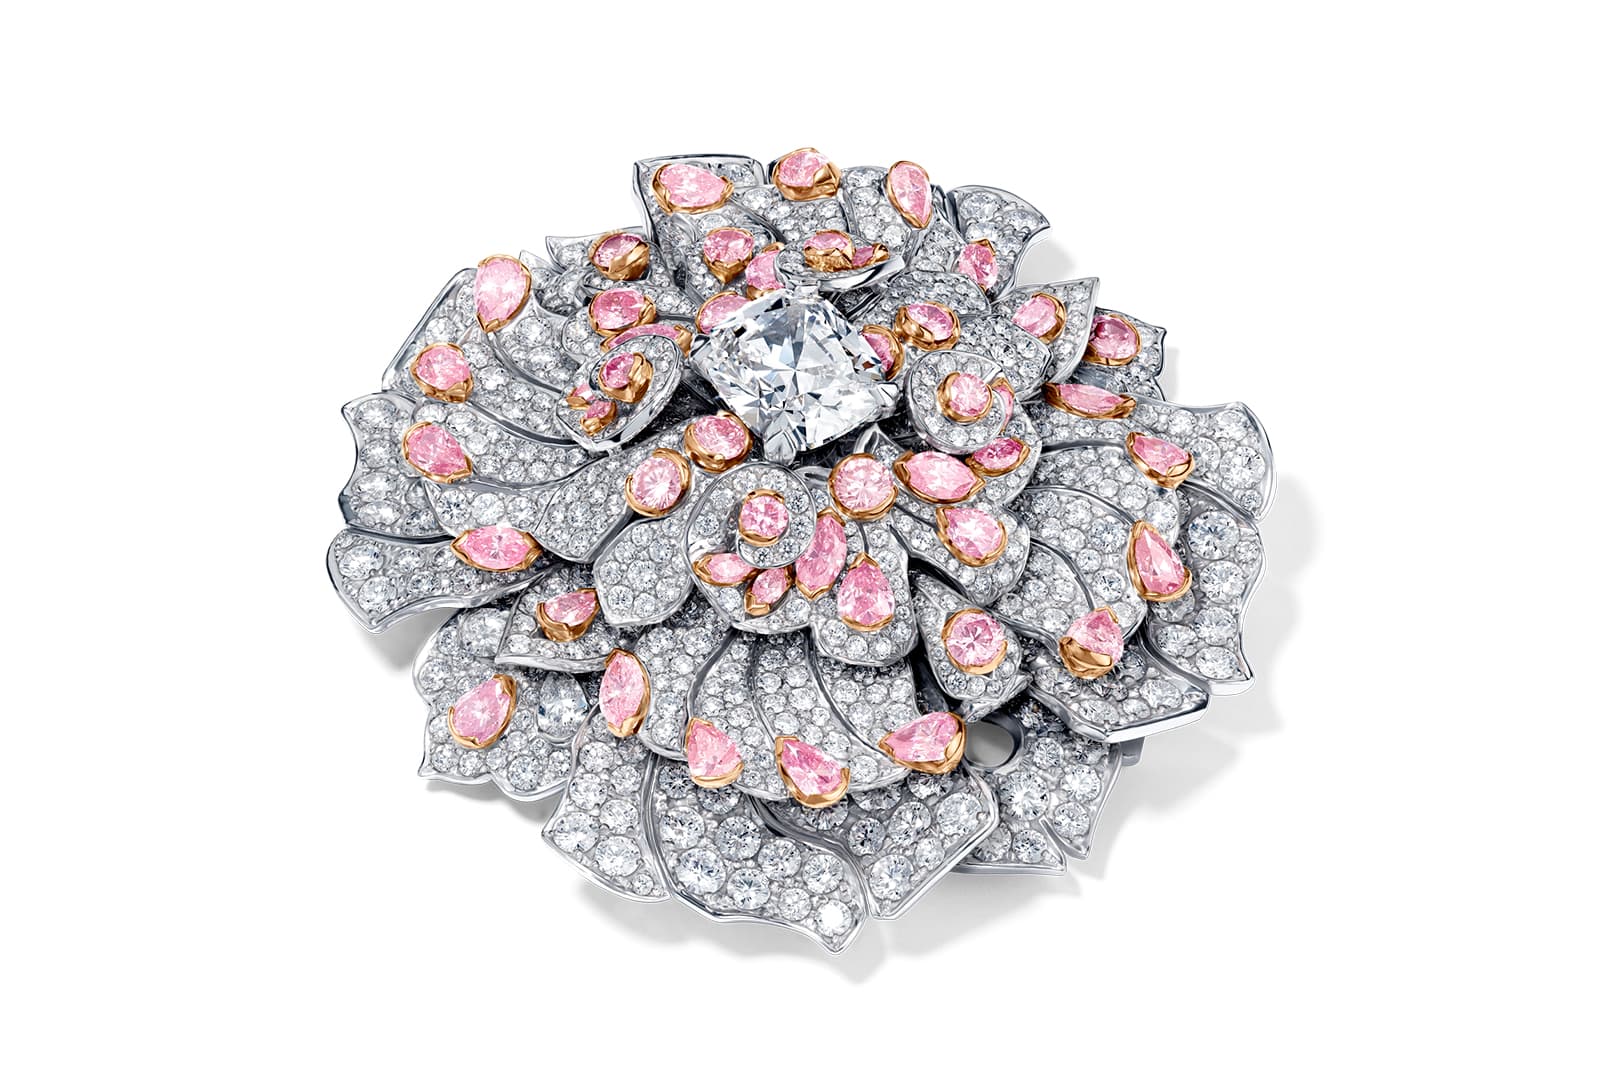 David Morris Fractal Rose brooch with a 5.01ct cushion-cut white diamond centre with pink and white diamond petals in 18k gold